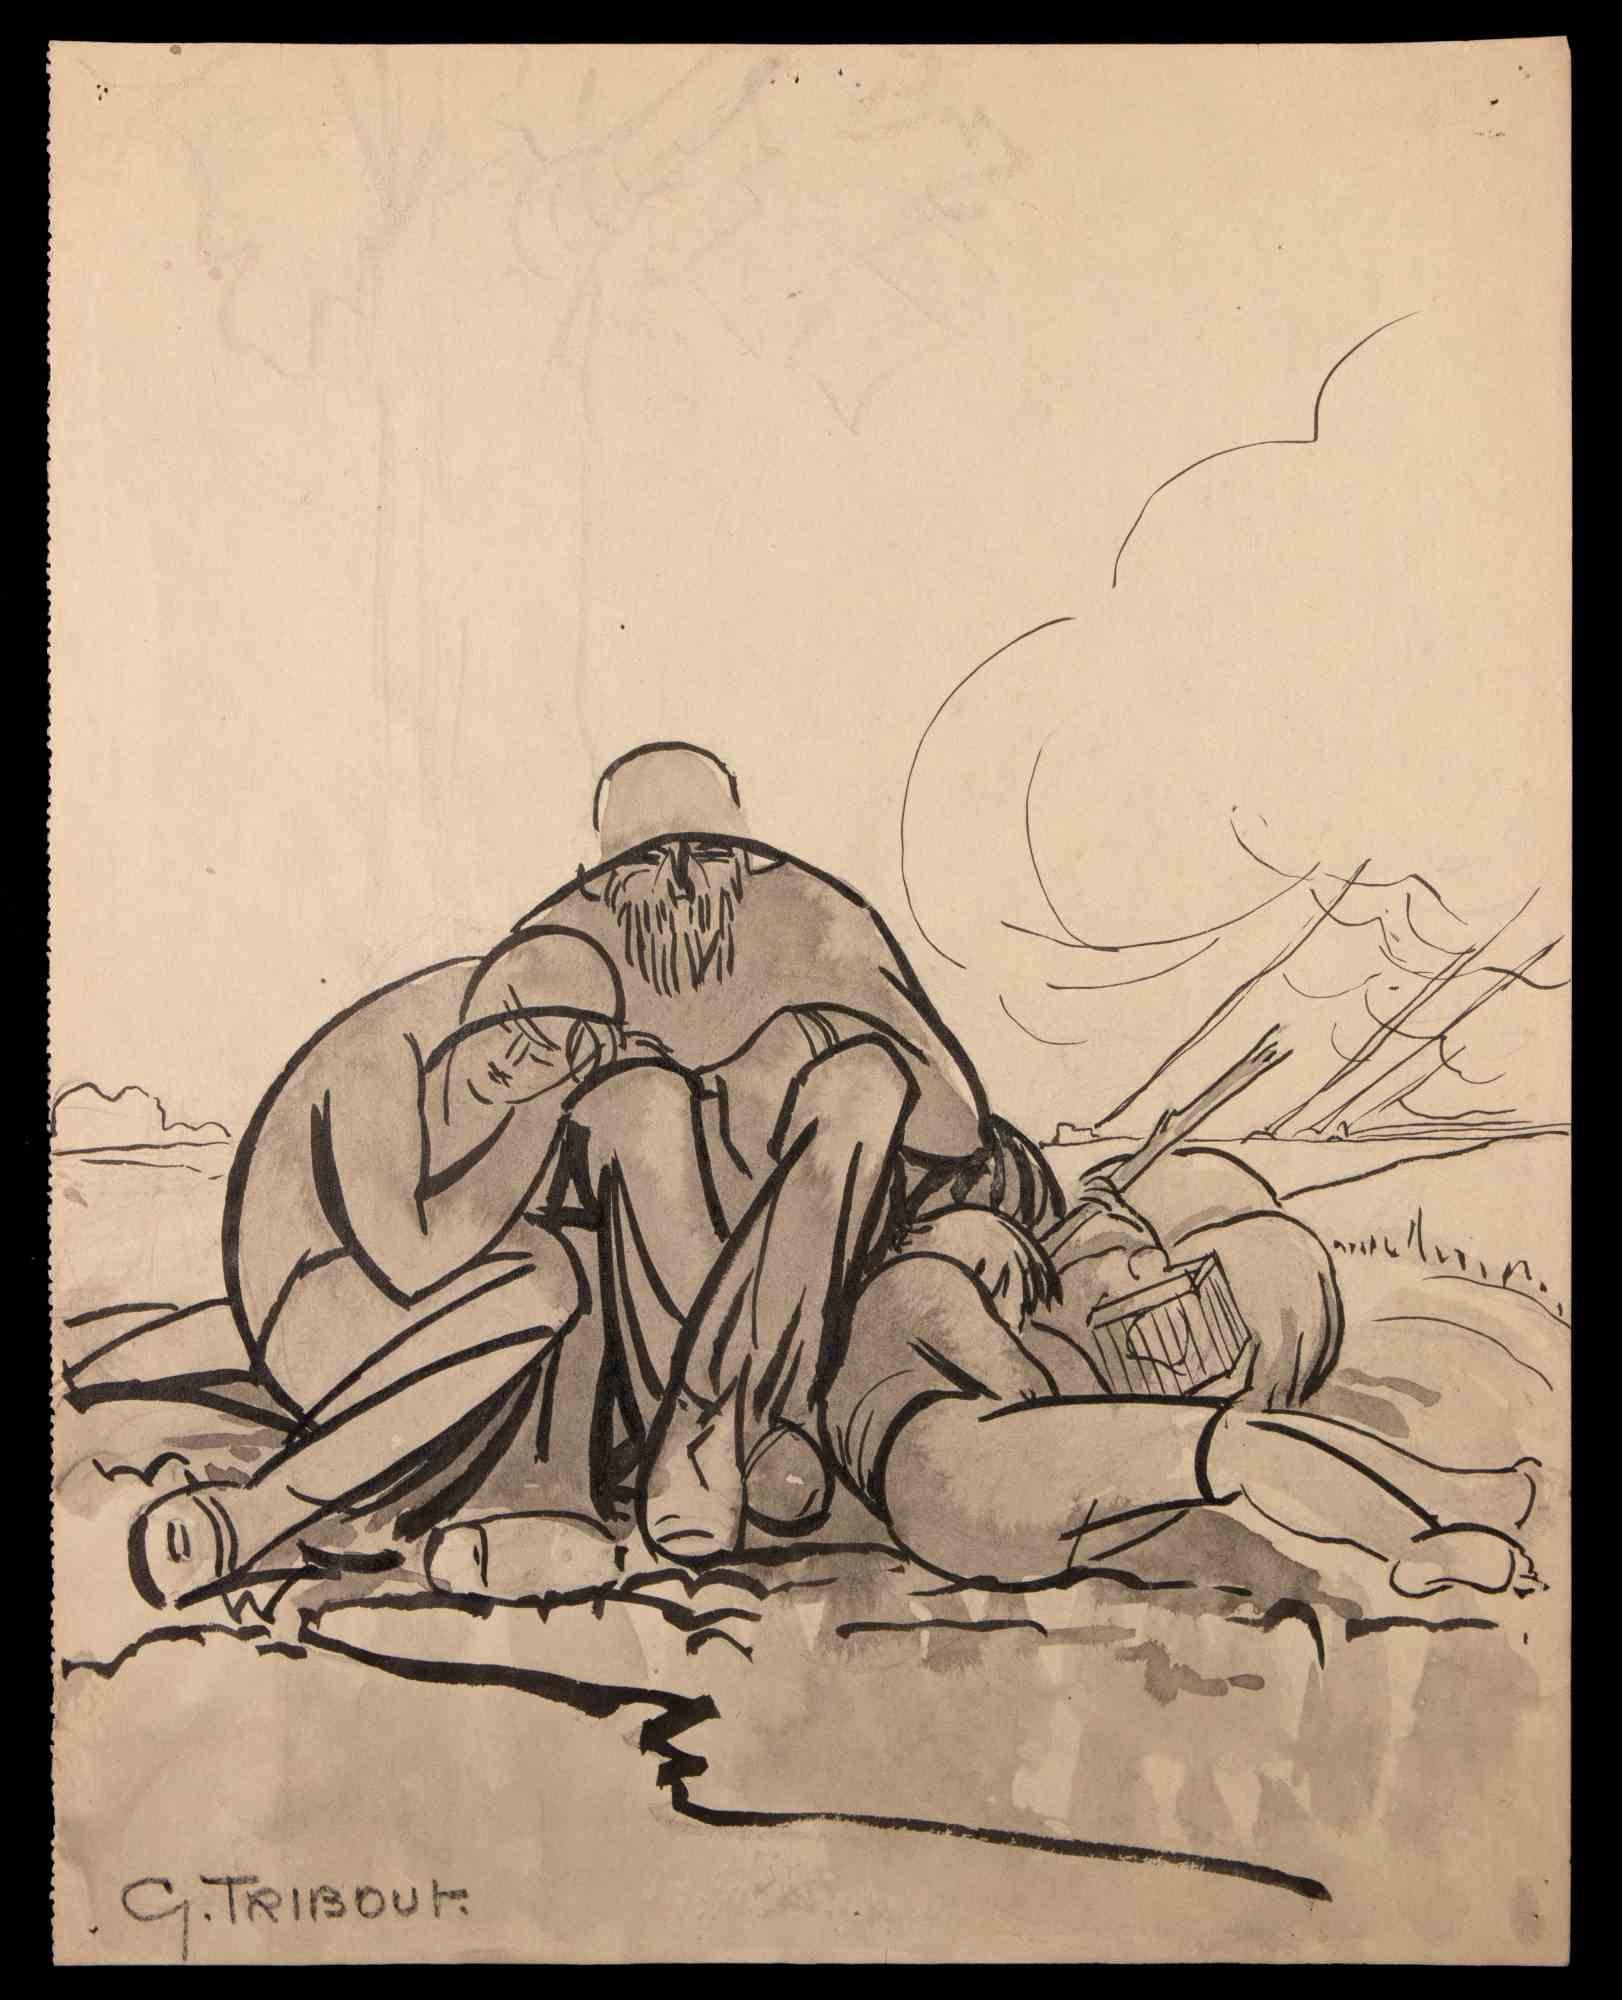 Georges-Henri Tribout Landscape Art - The Family - Original Drawing by George-Henri Tribout - 1940